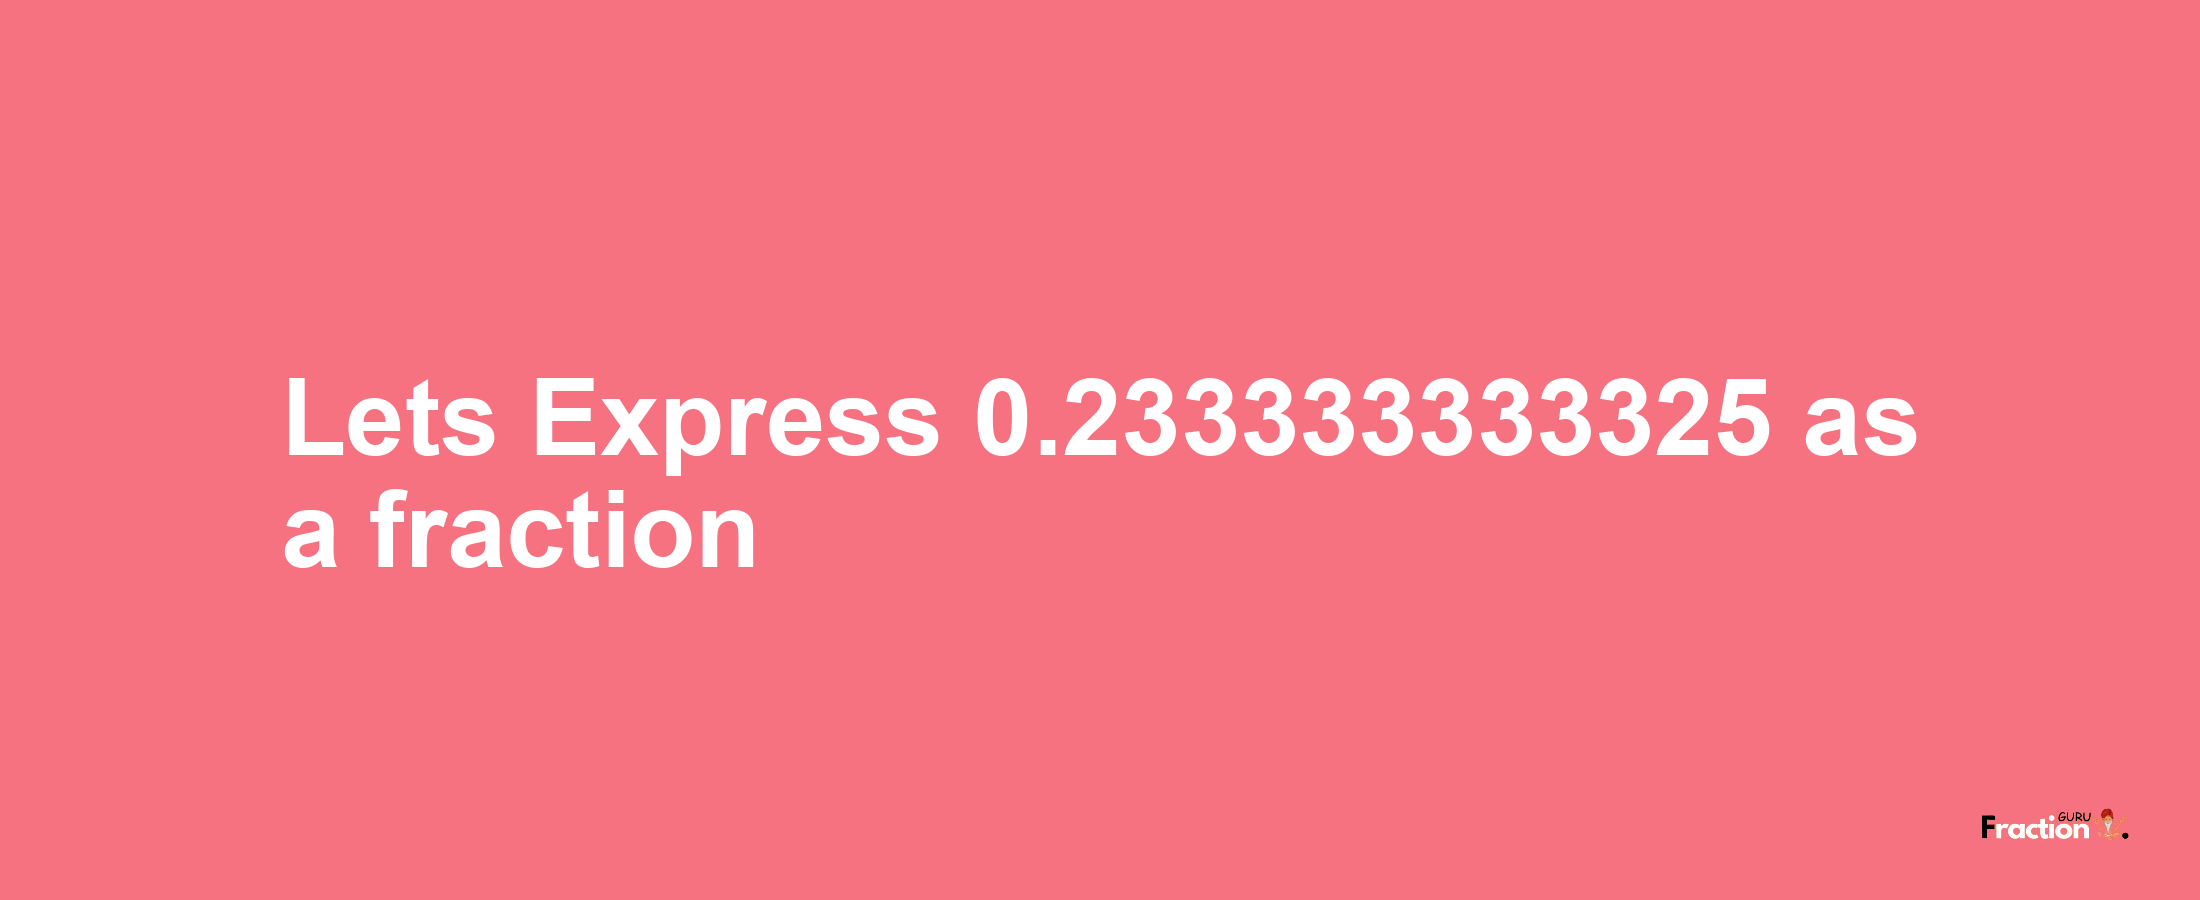 Lets Express 0.233333333325 as afraction